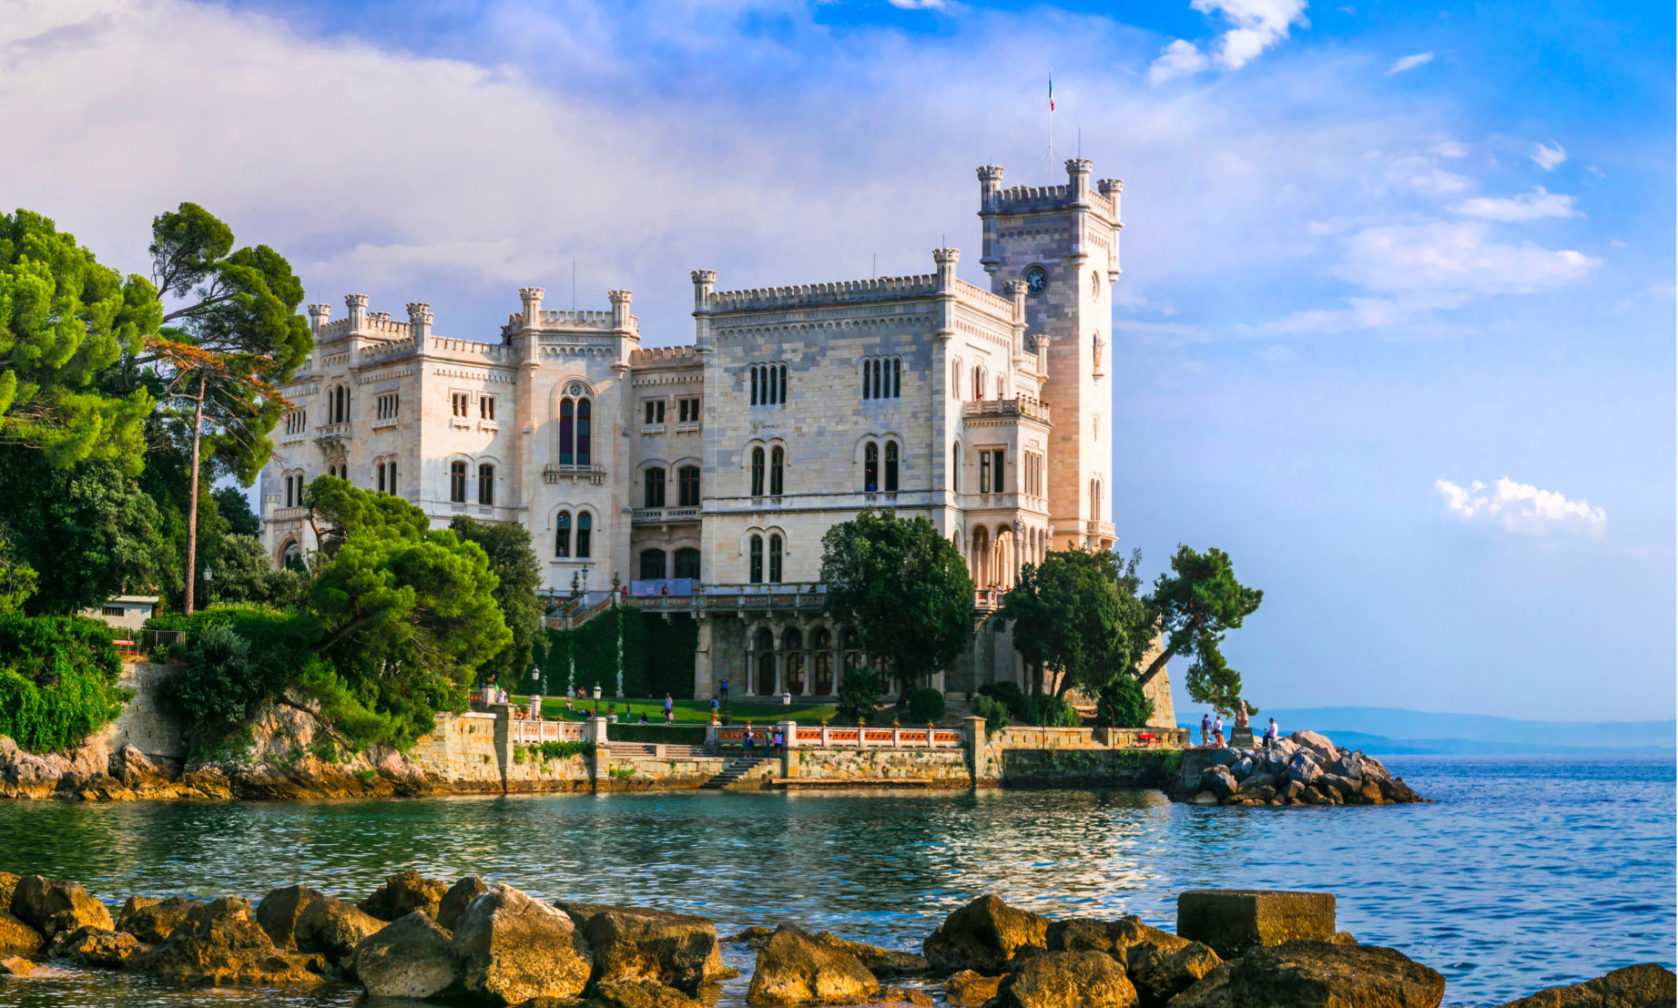 White castle on the rocky bank of Trieste, Italy.